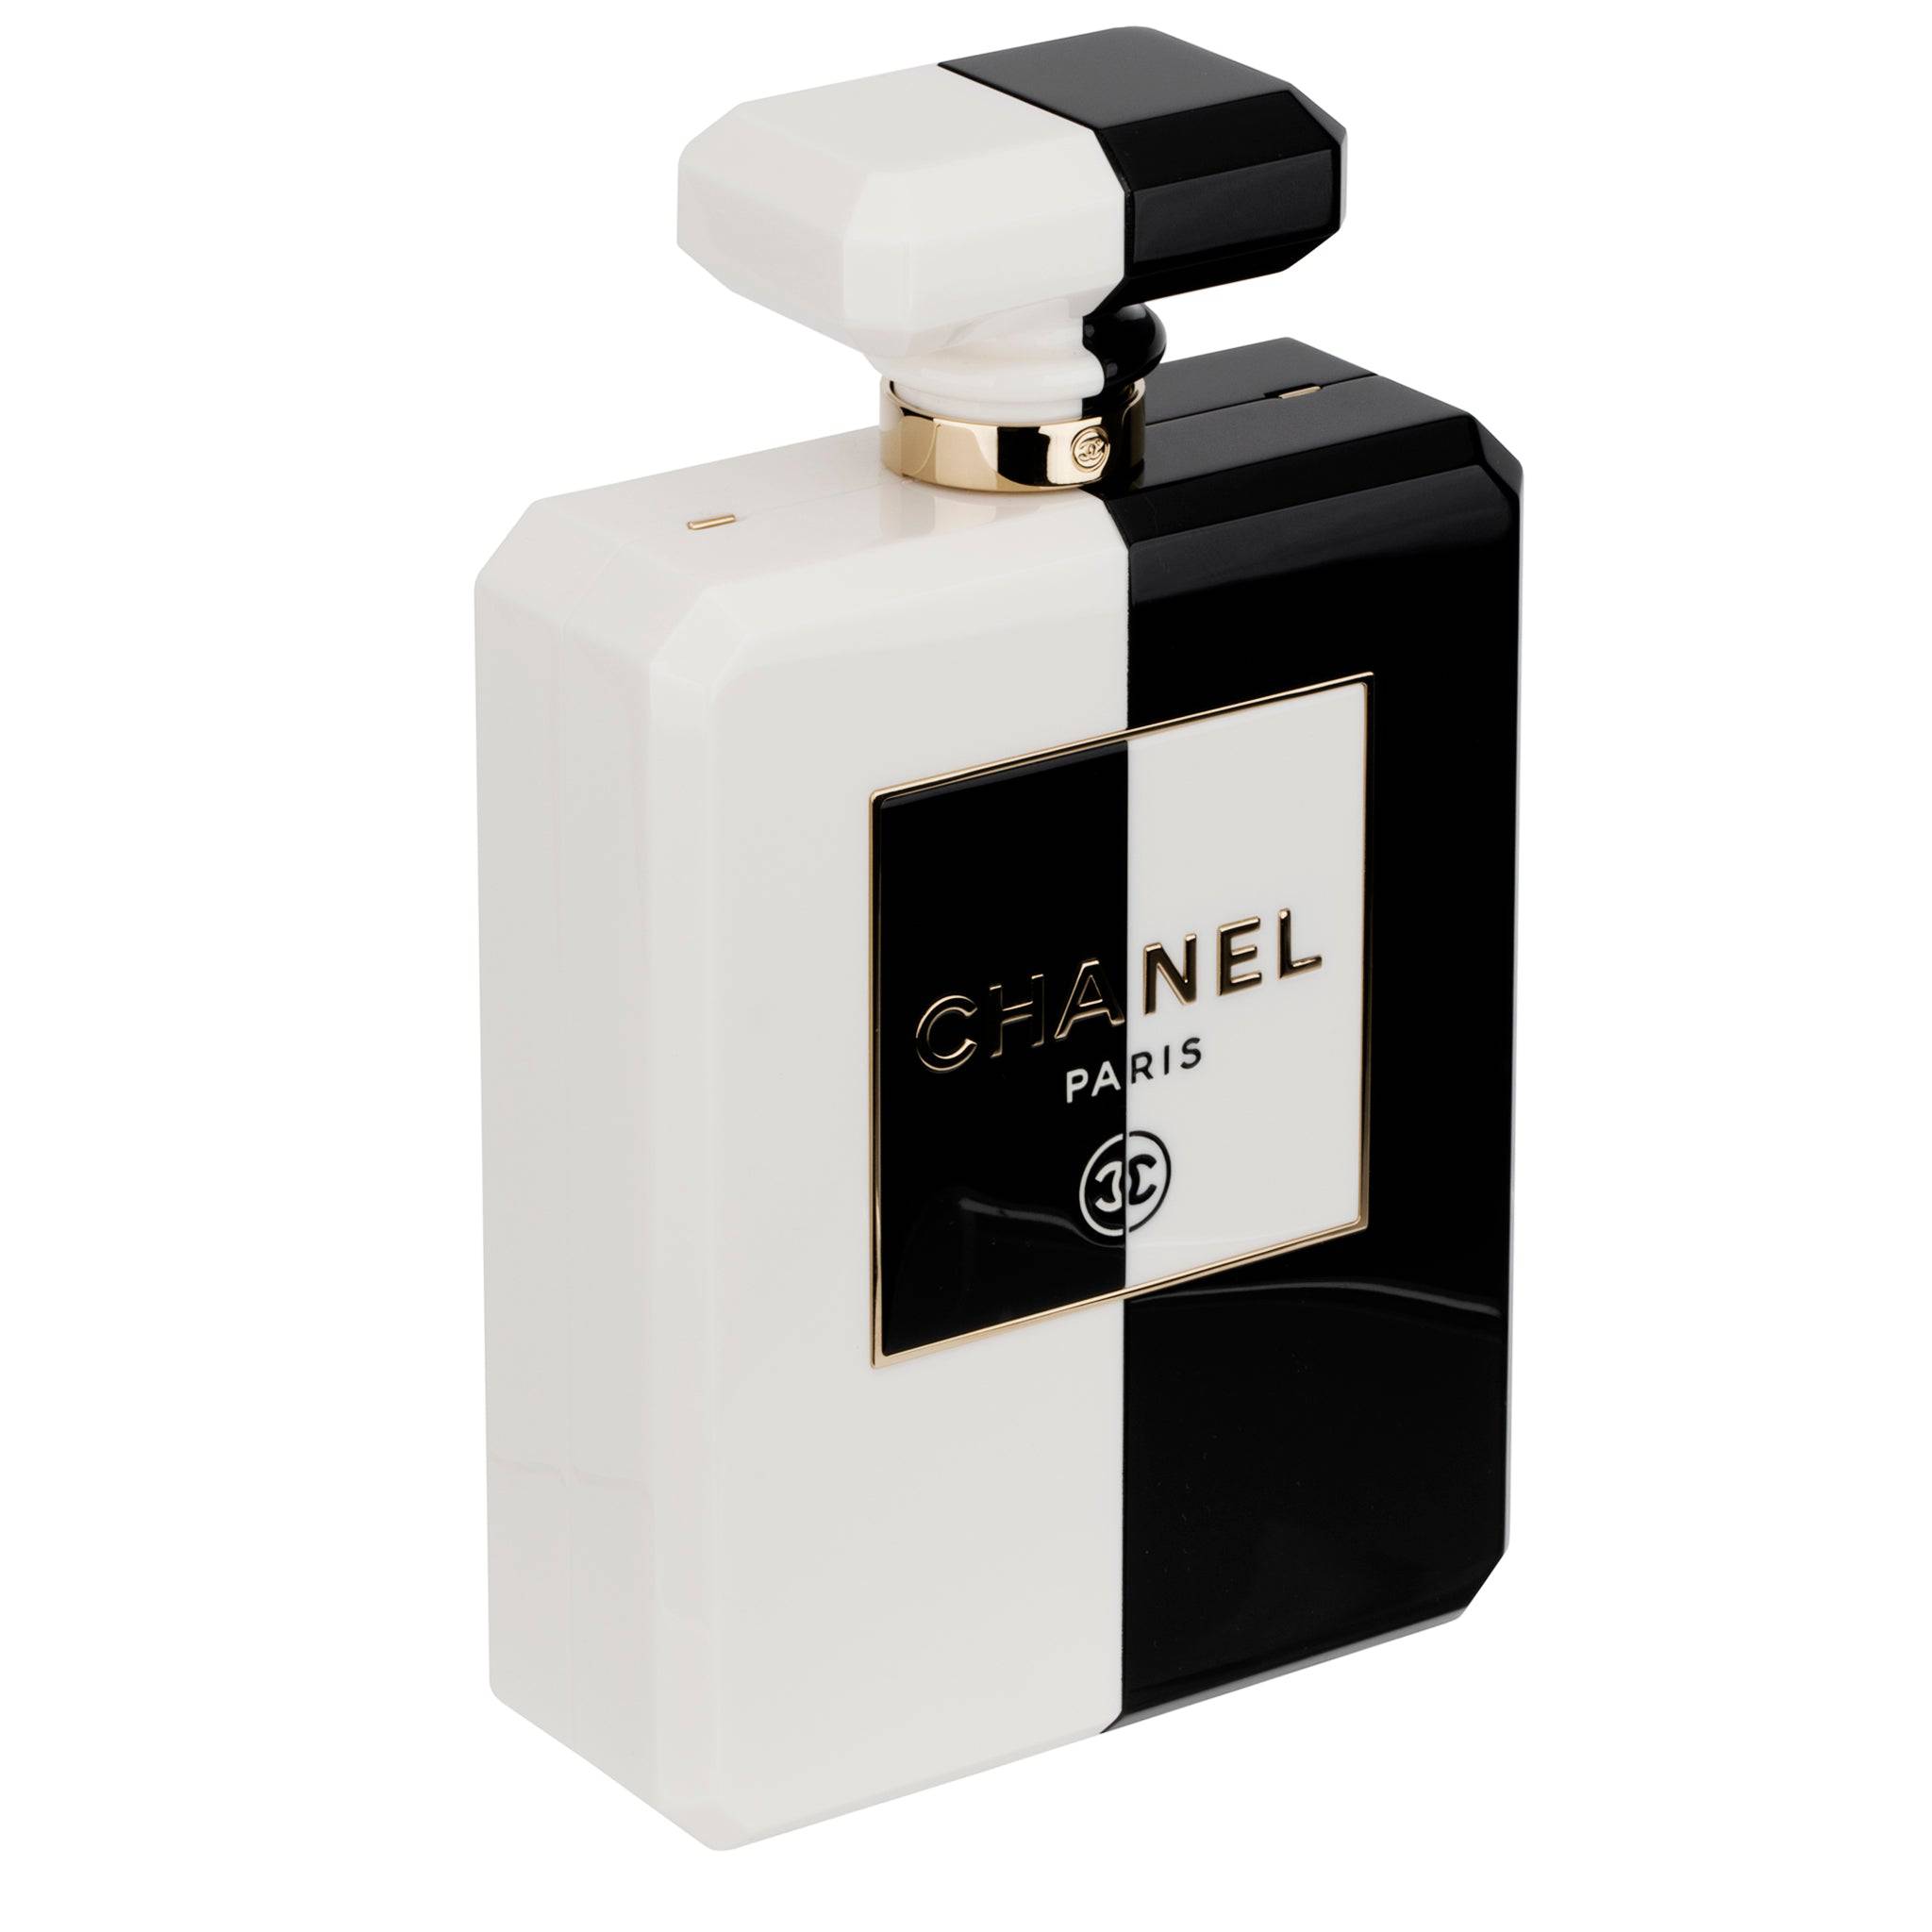 CHANEL MINAUDIÈRE LIMITED EDITION LUCITE PERFUME BOTTLE BLACK & WHITE GOLD HARDWARE - On Repeat